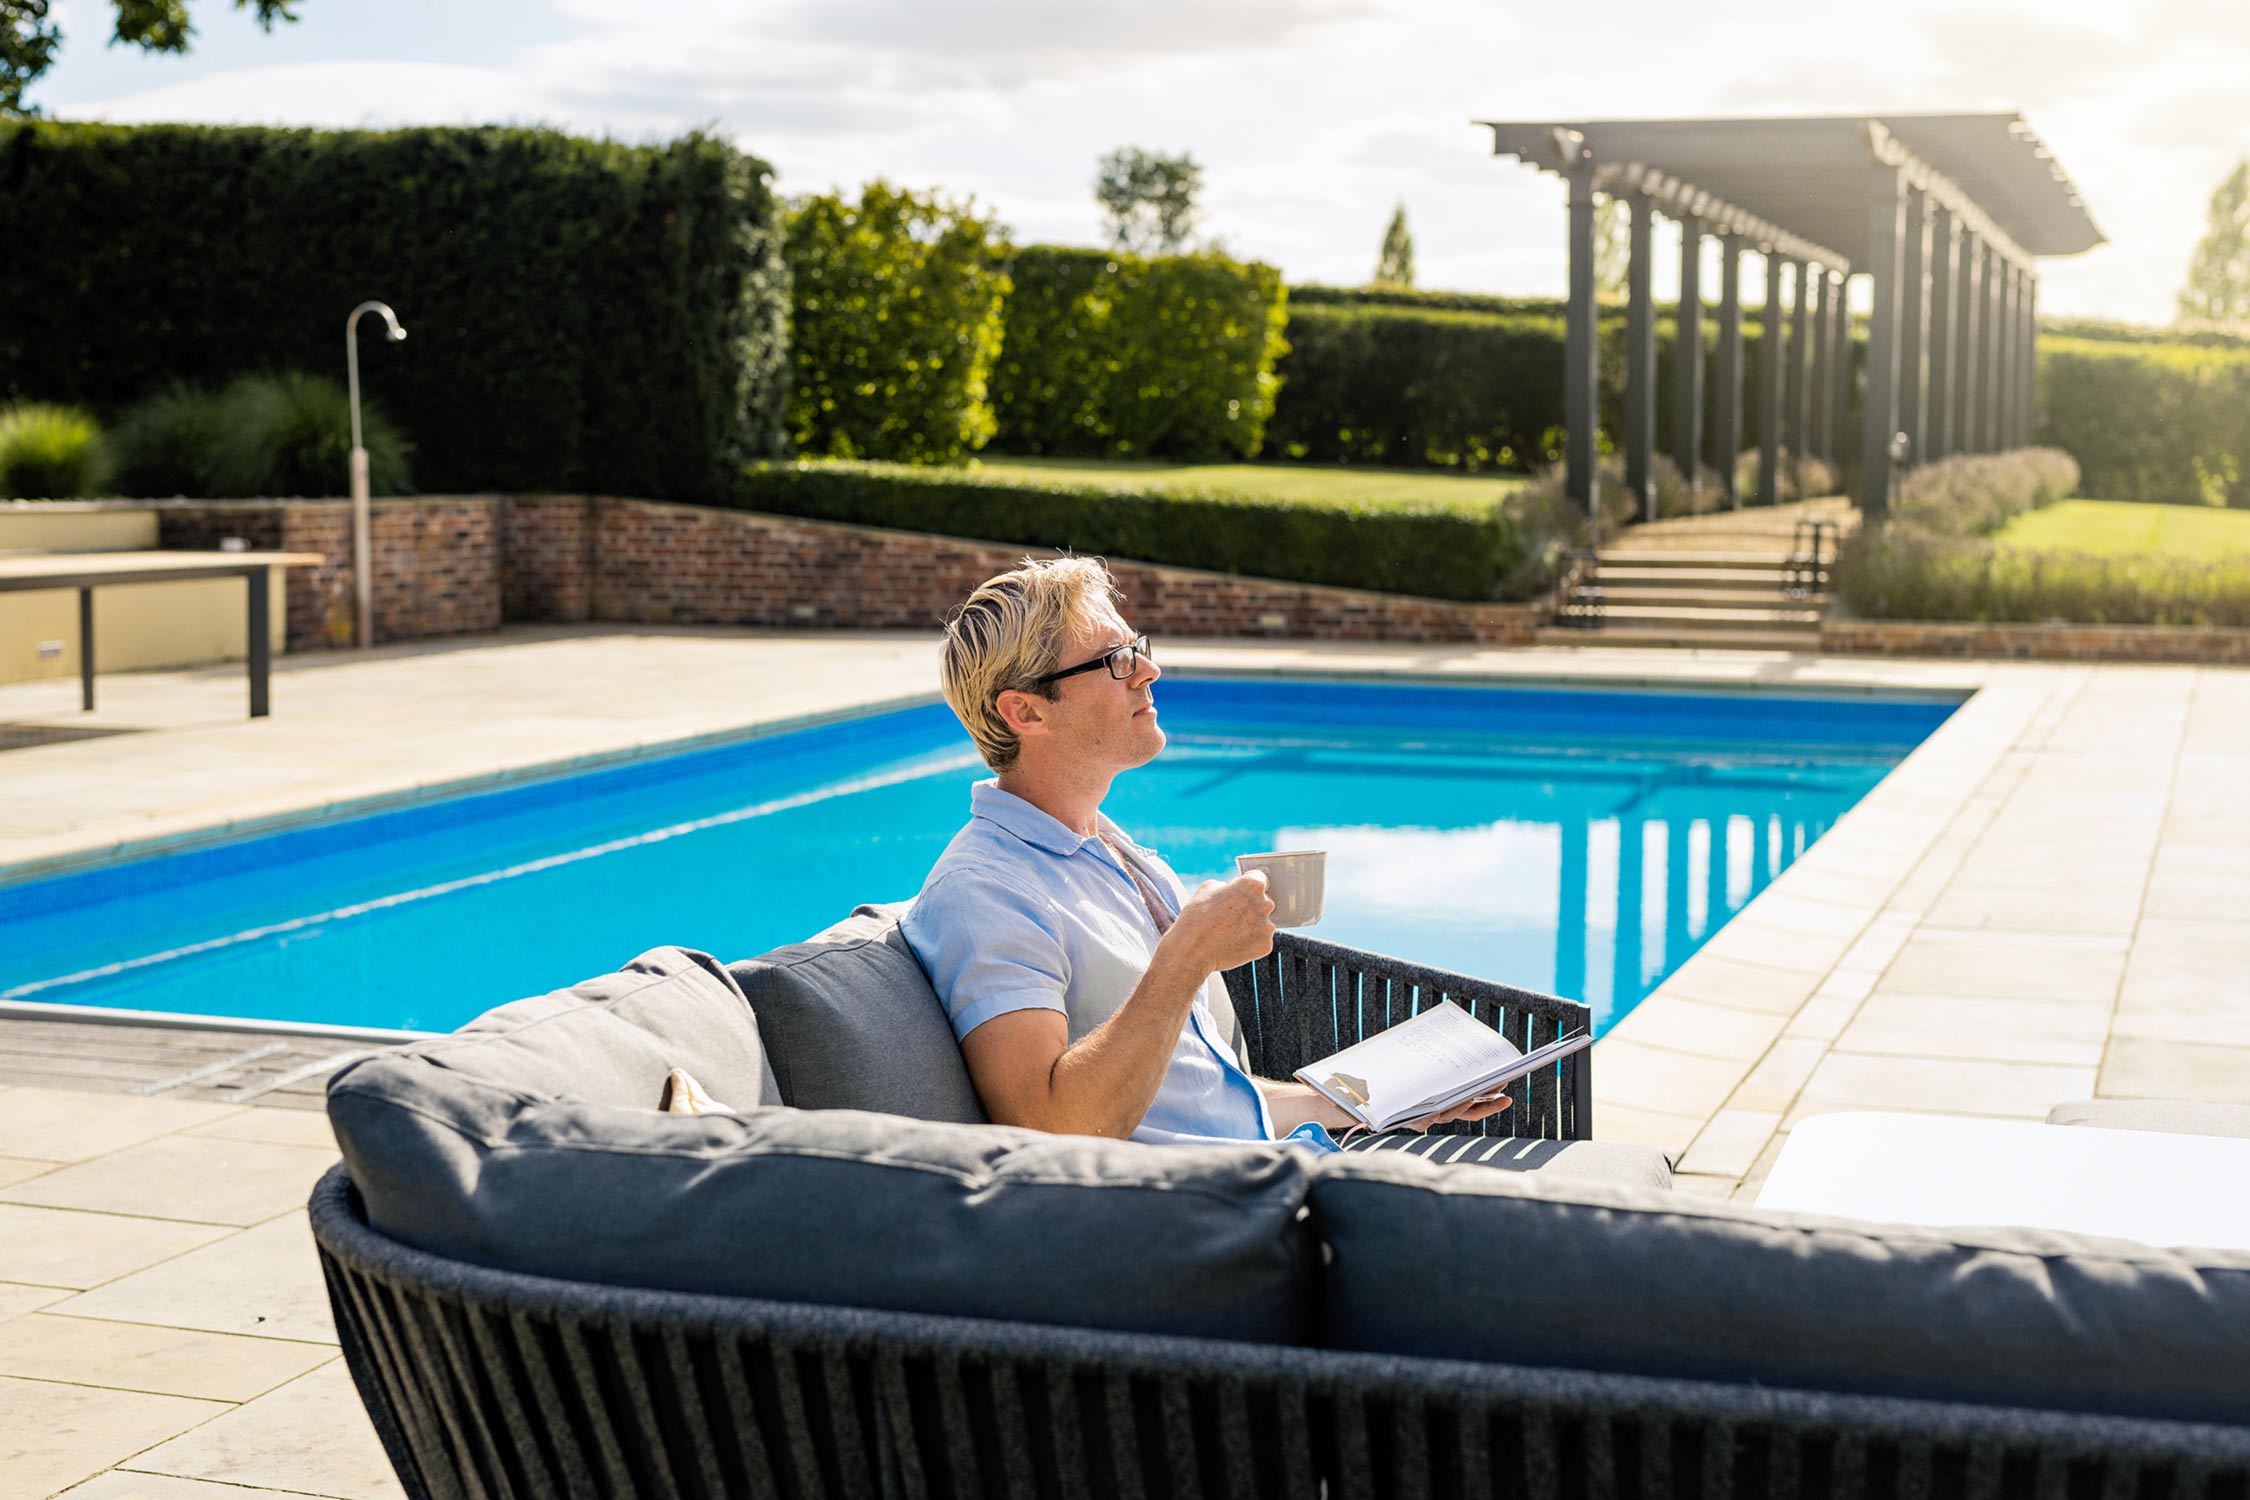 Lifestyle product photography of a high end garden furniture with an attractive man drinking coffee by a swimming pool in a smart summer garden.